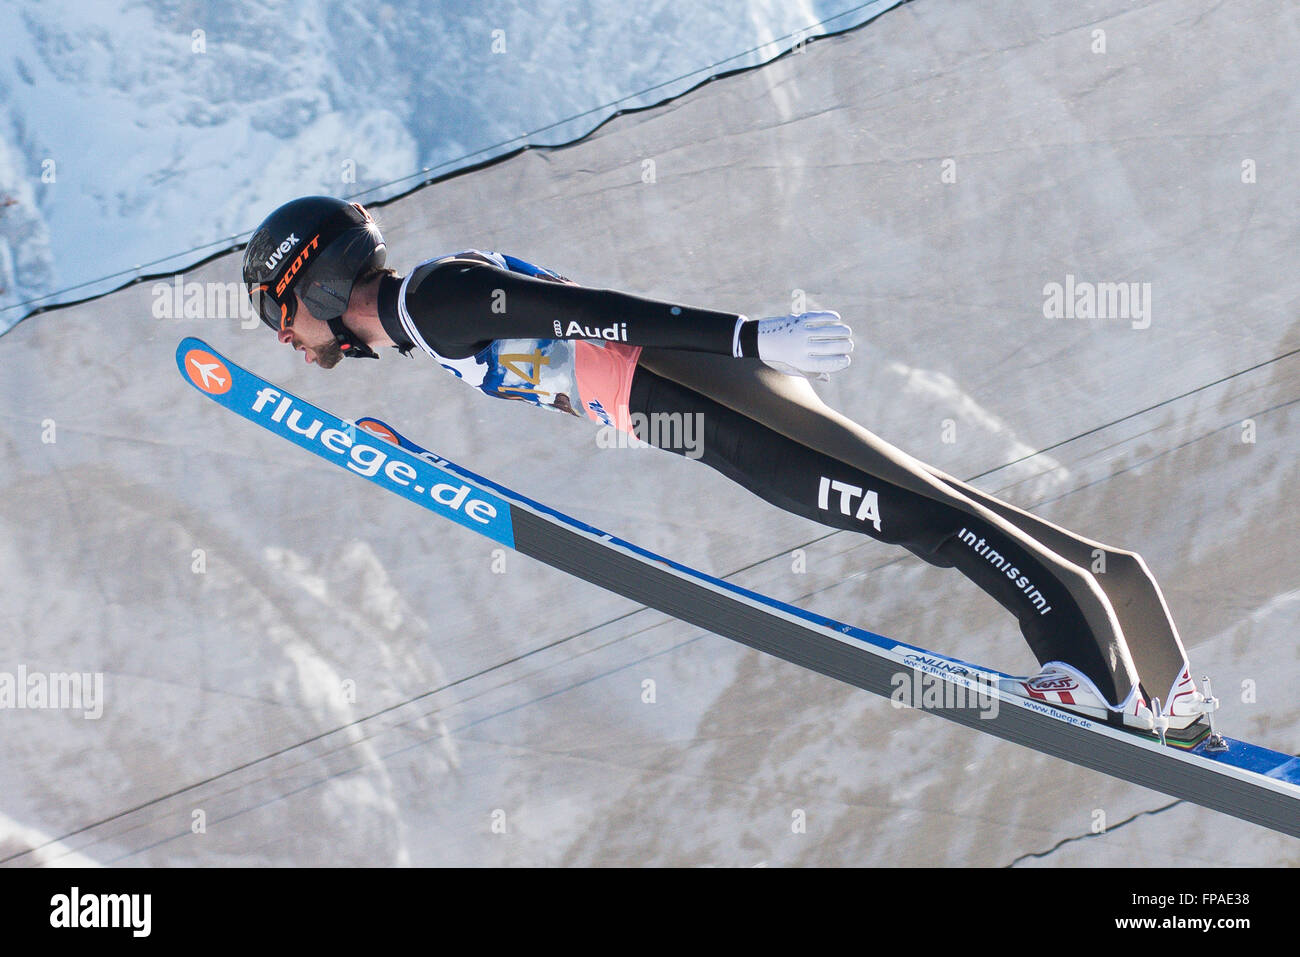 Planica, Slovenia. 18th Mar, 2016. Andrea Morassi of Italy competes during Planica FIS Ski Jumping World Cup finals on the March 18, 2016 in Planica, Slovenia. © Rok Rakun/Pacific Press/Alamy Live News Stock Photo